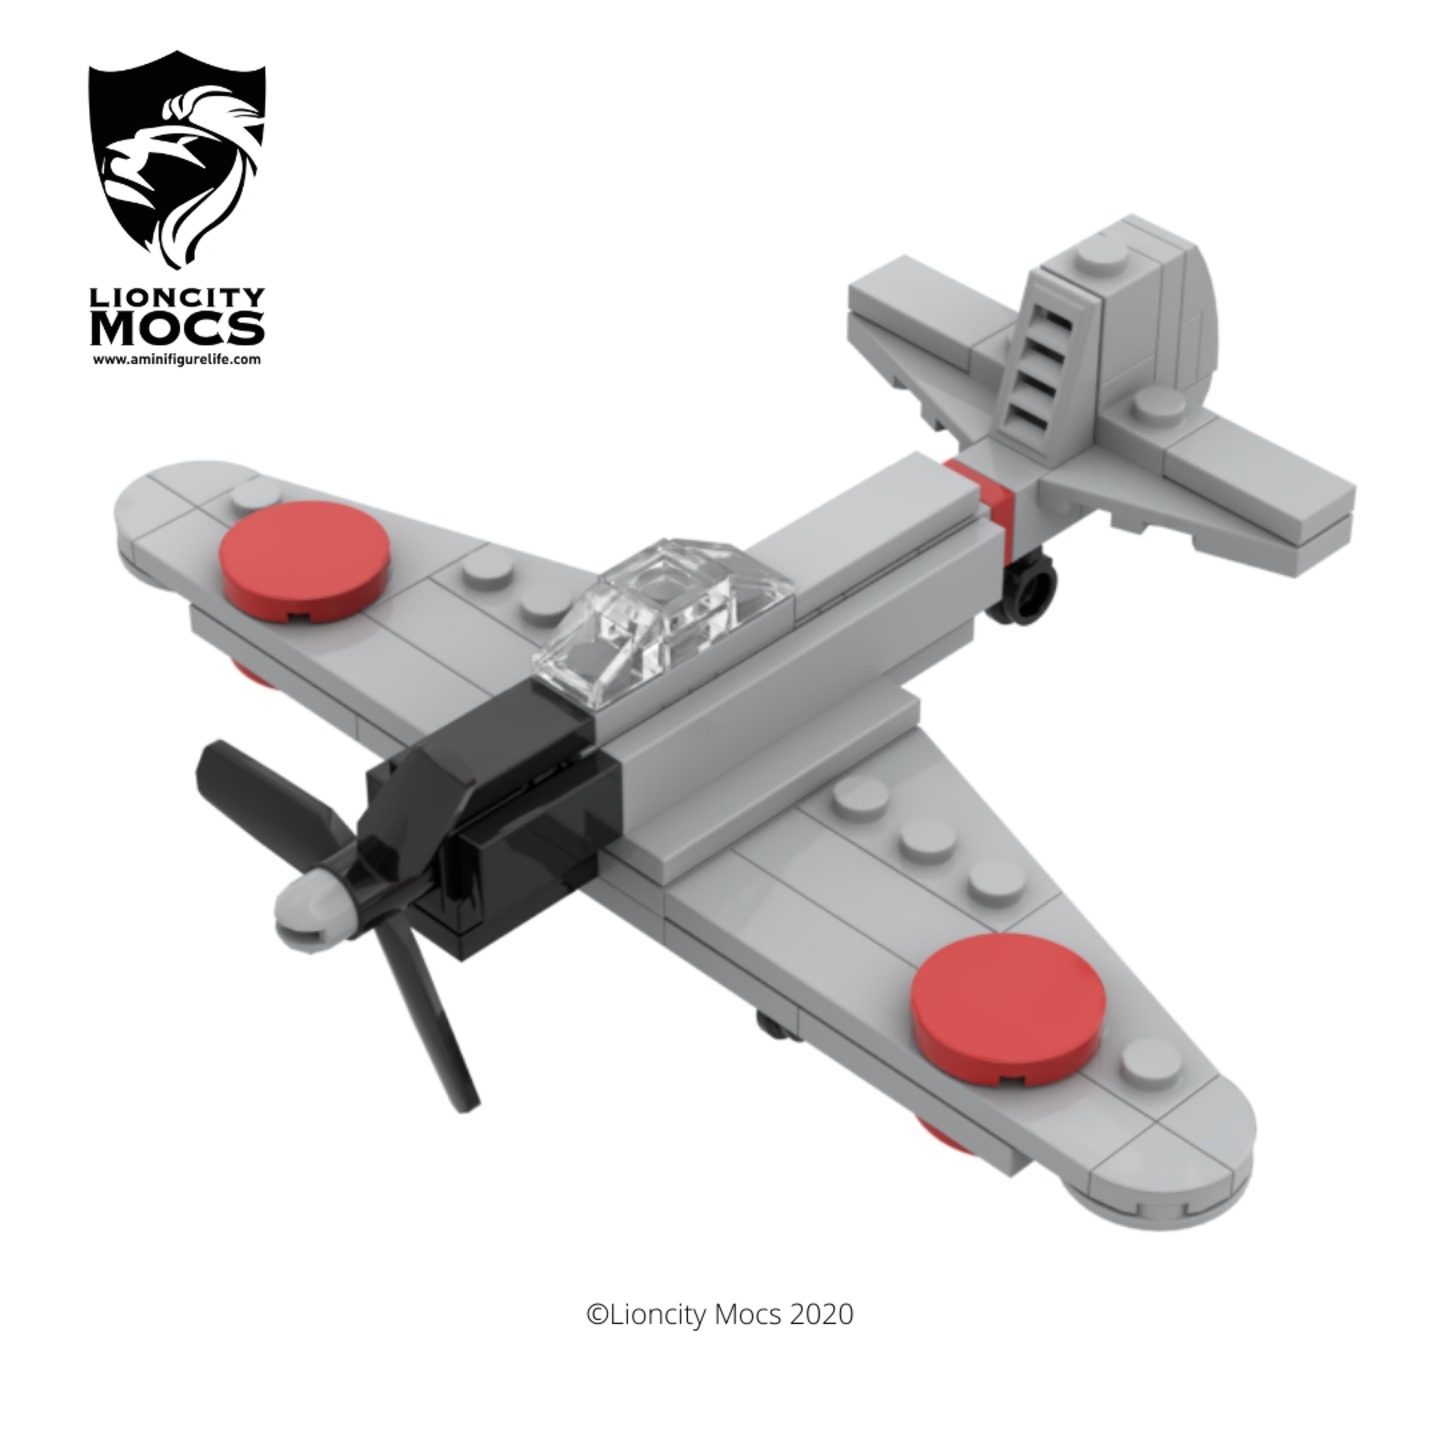 [PDF Instructions Only] A6M2 Zero Fighter WWII Mini Aircraft 